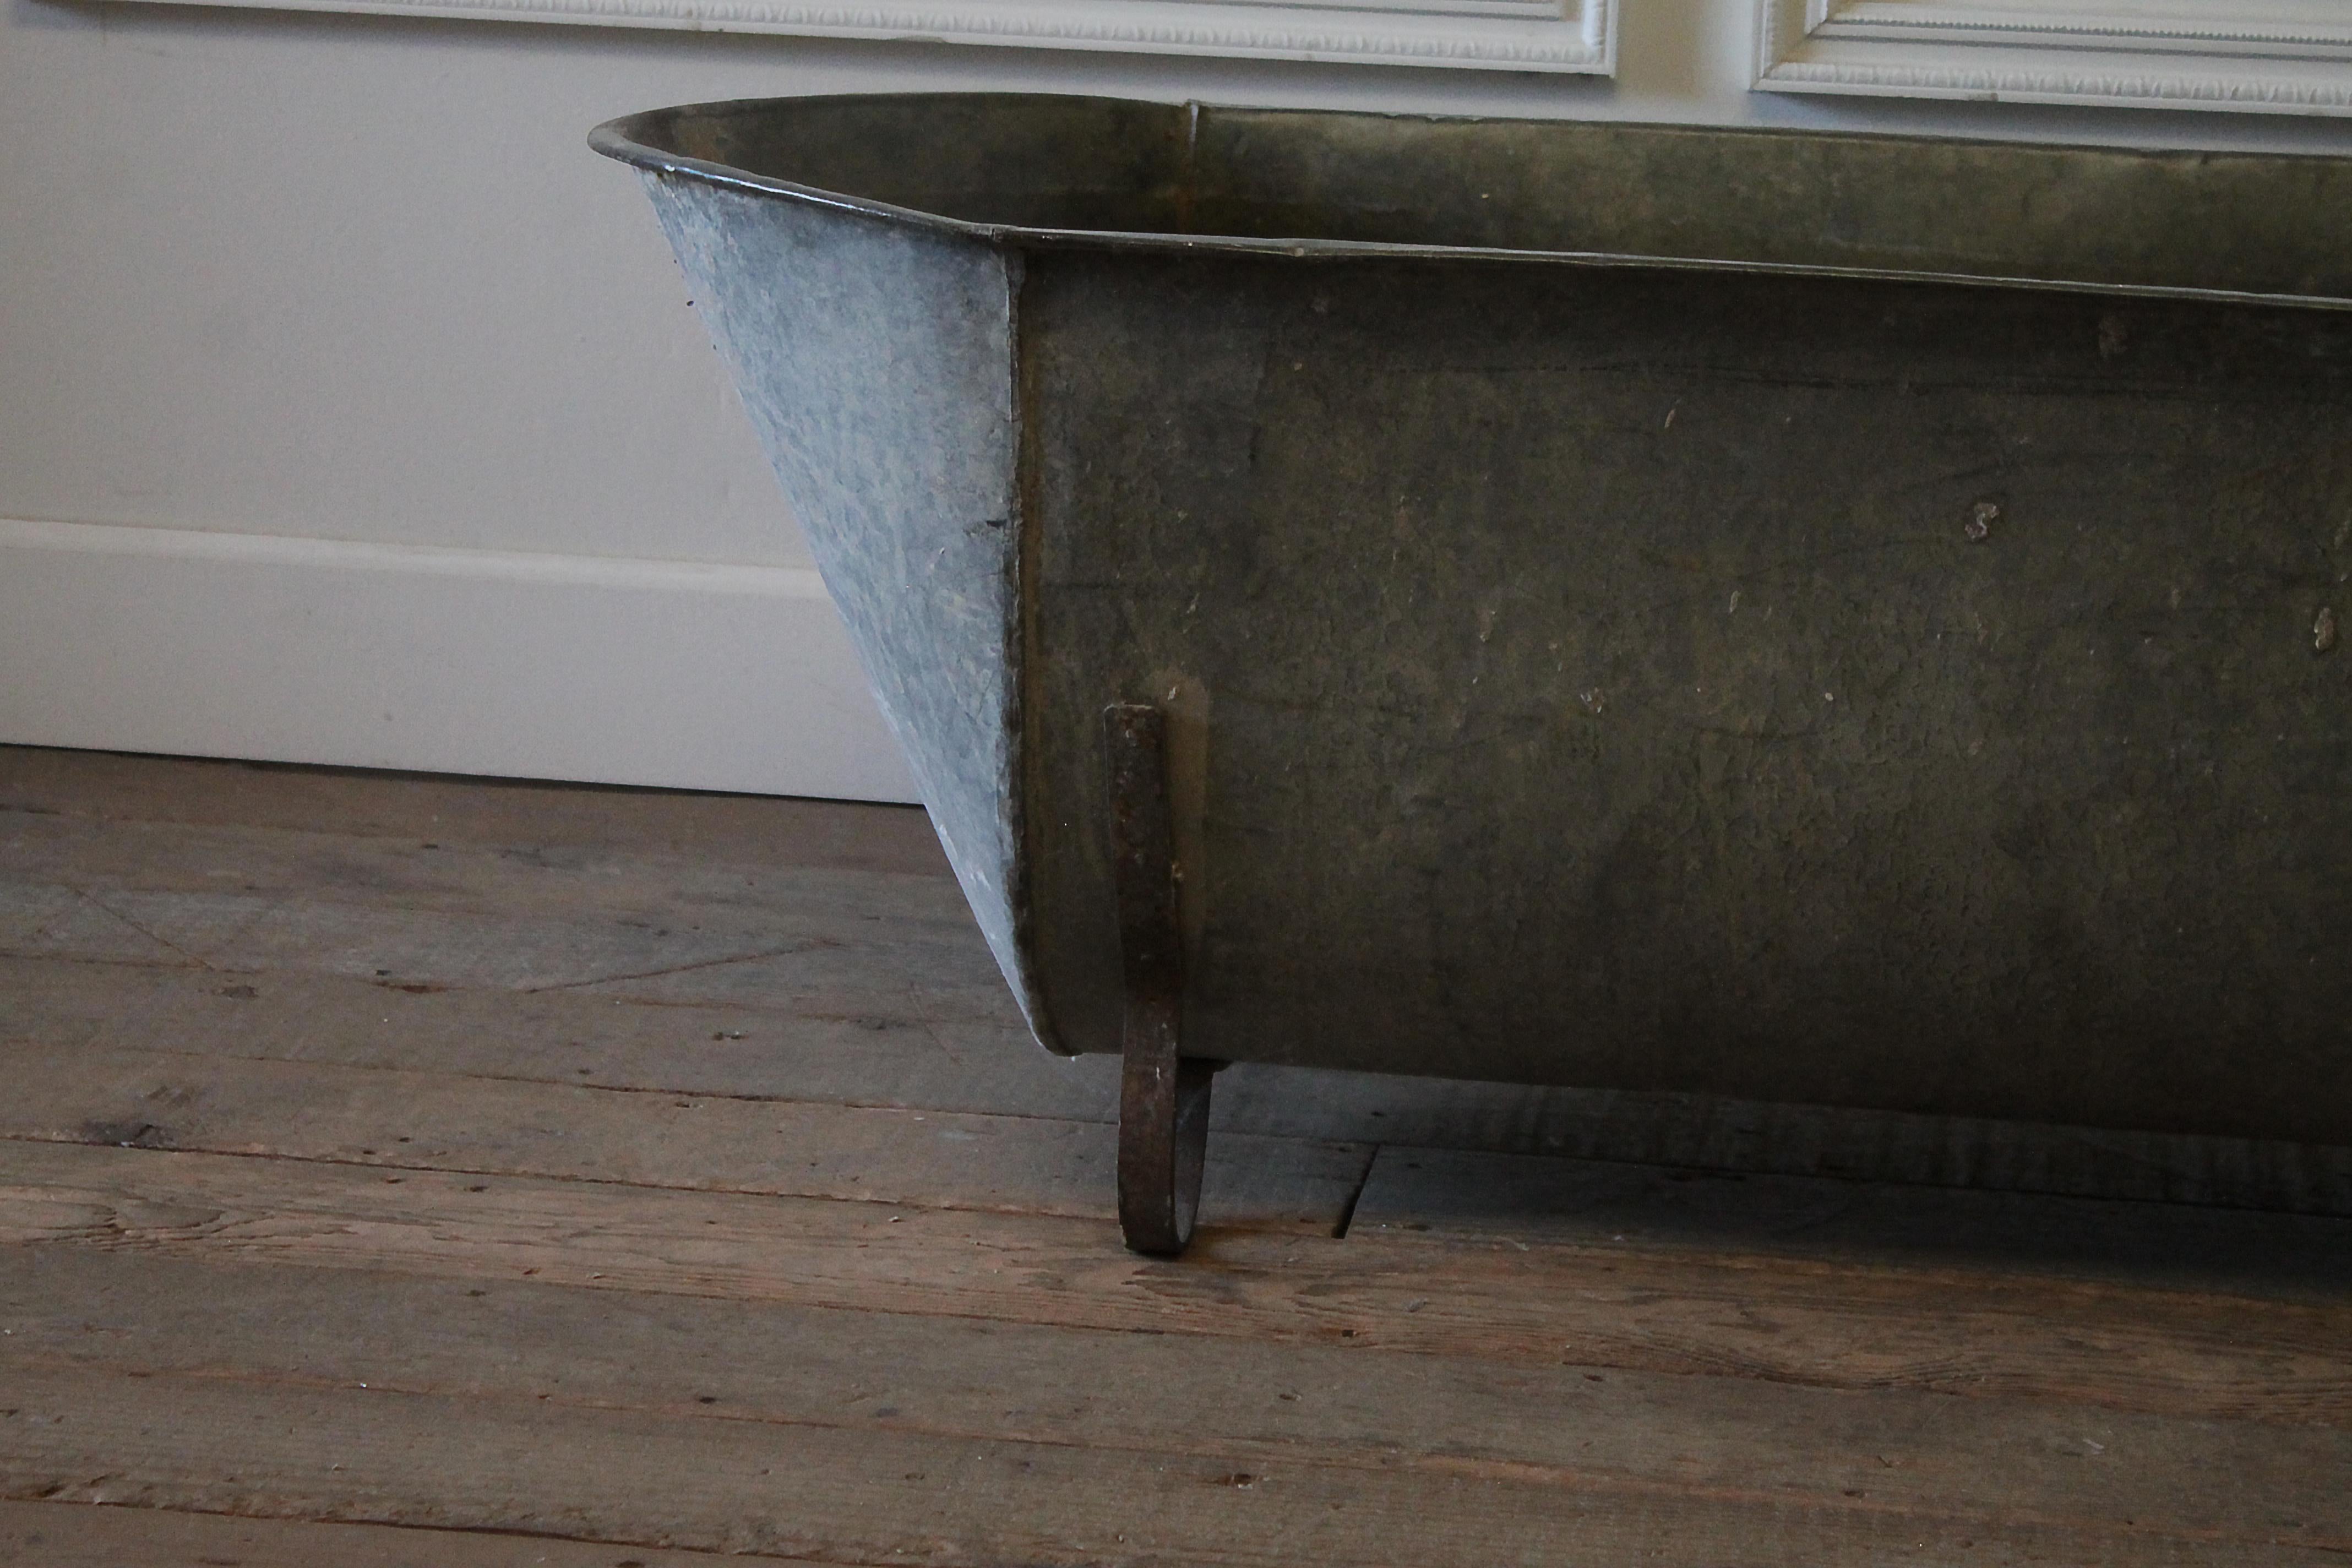 19th century French zinc tub
Measures: 
57.5